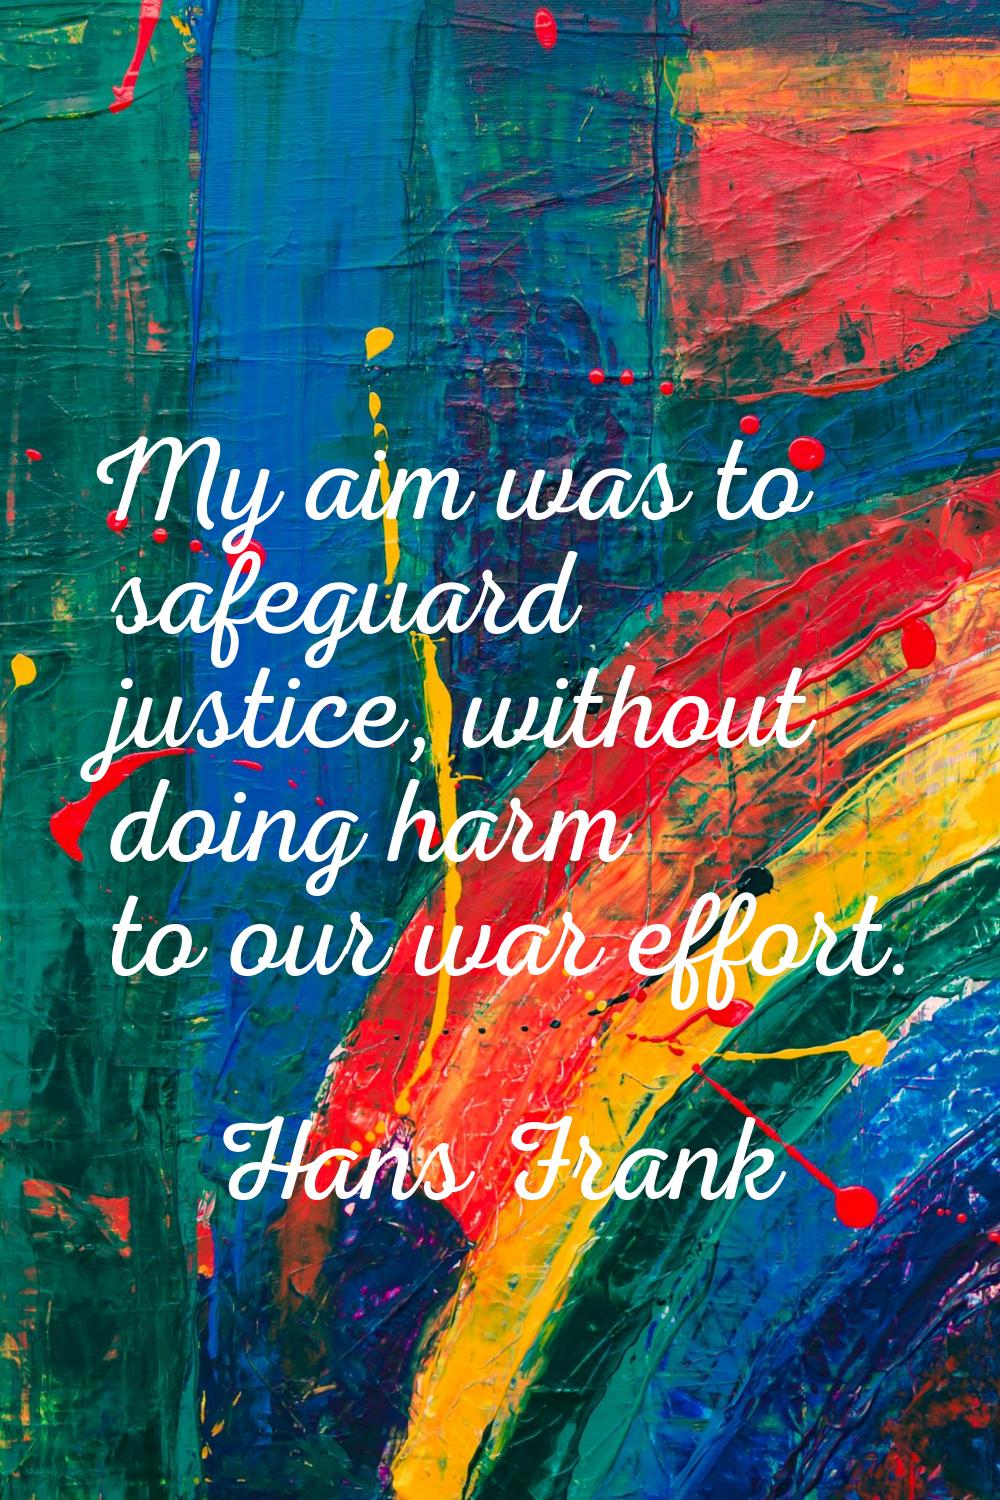 My aim was to safeguard justice, without doing harm to our war effort.